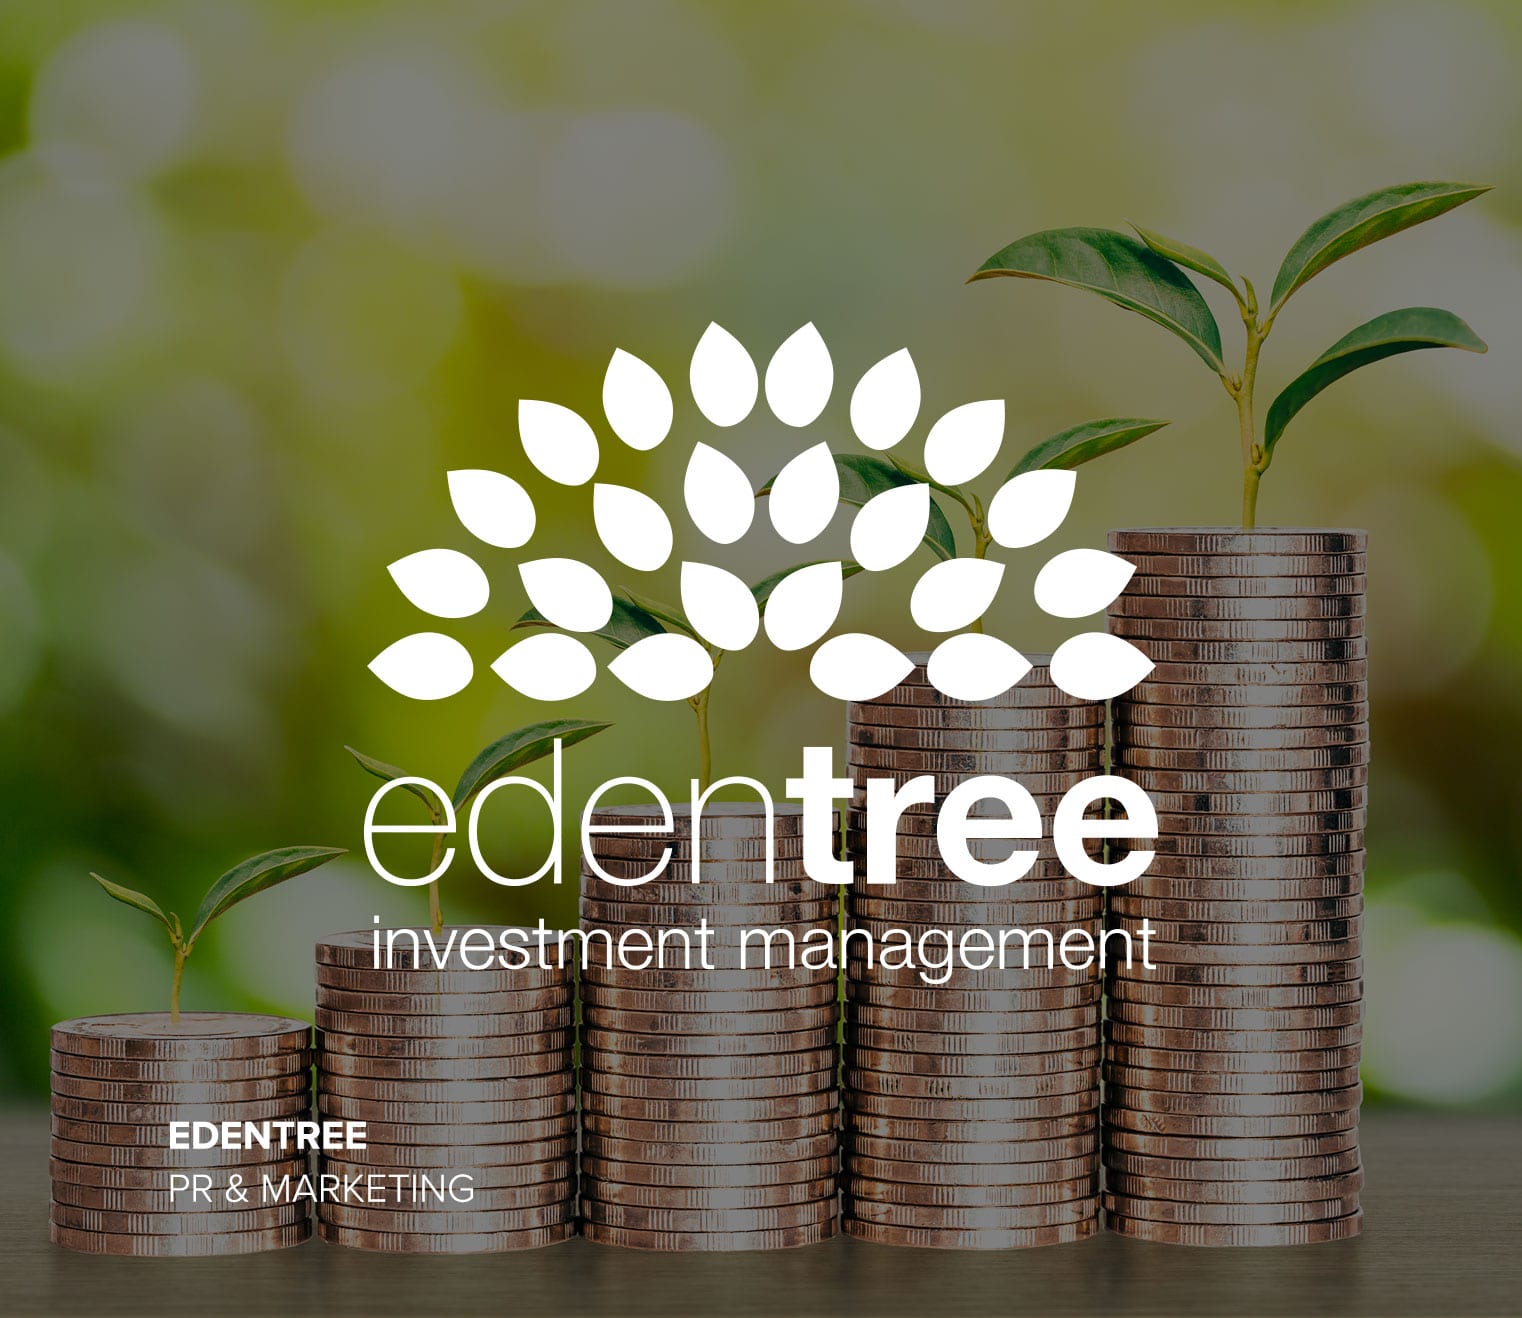 The EdenTree logo over a background image showing stacks of coins on a table with sprouts growing out of the top of them.